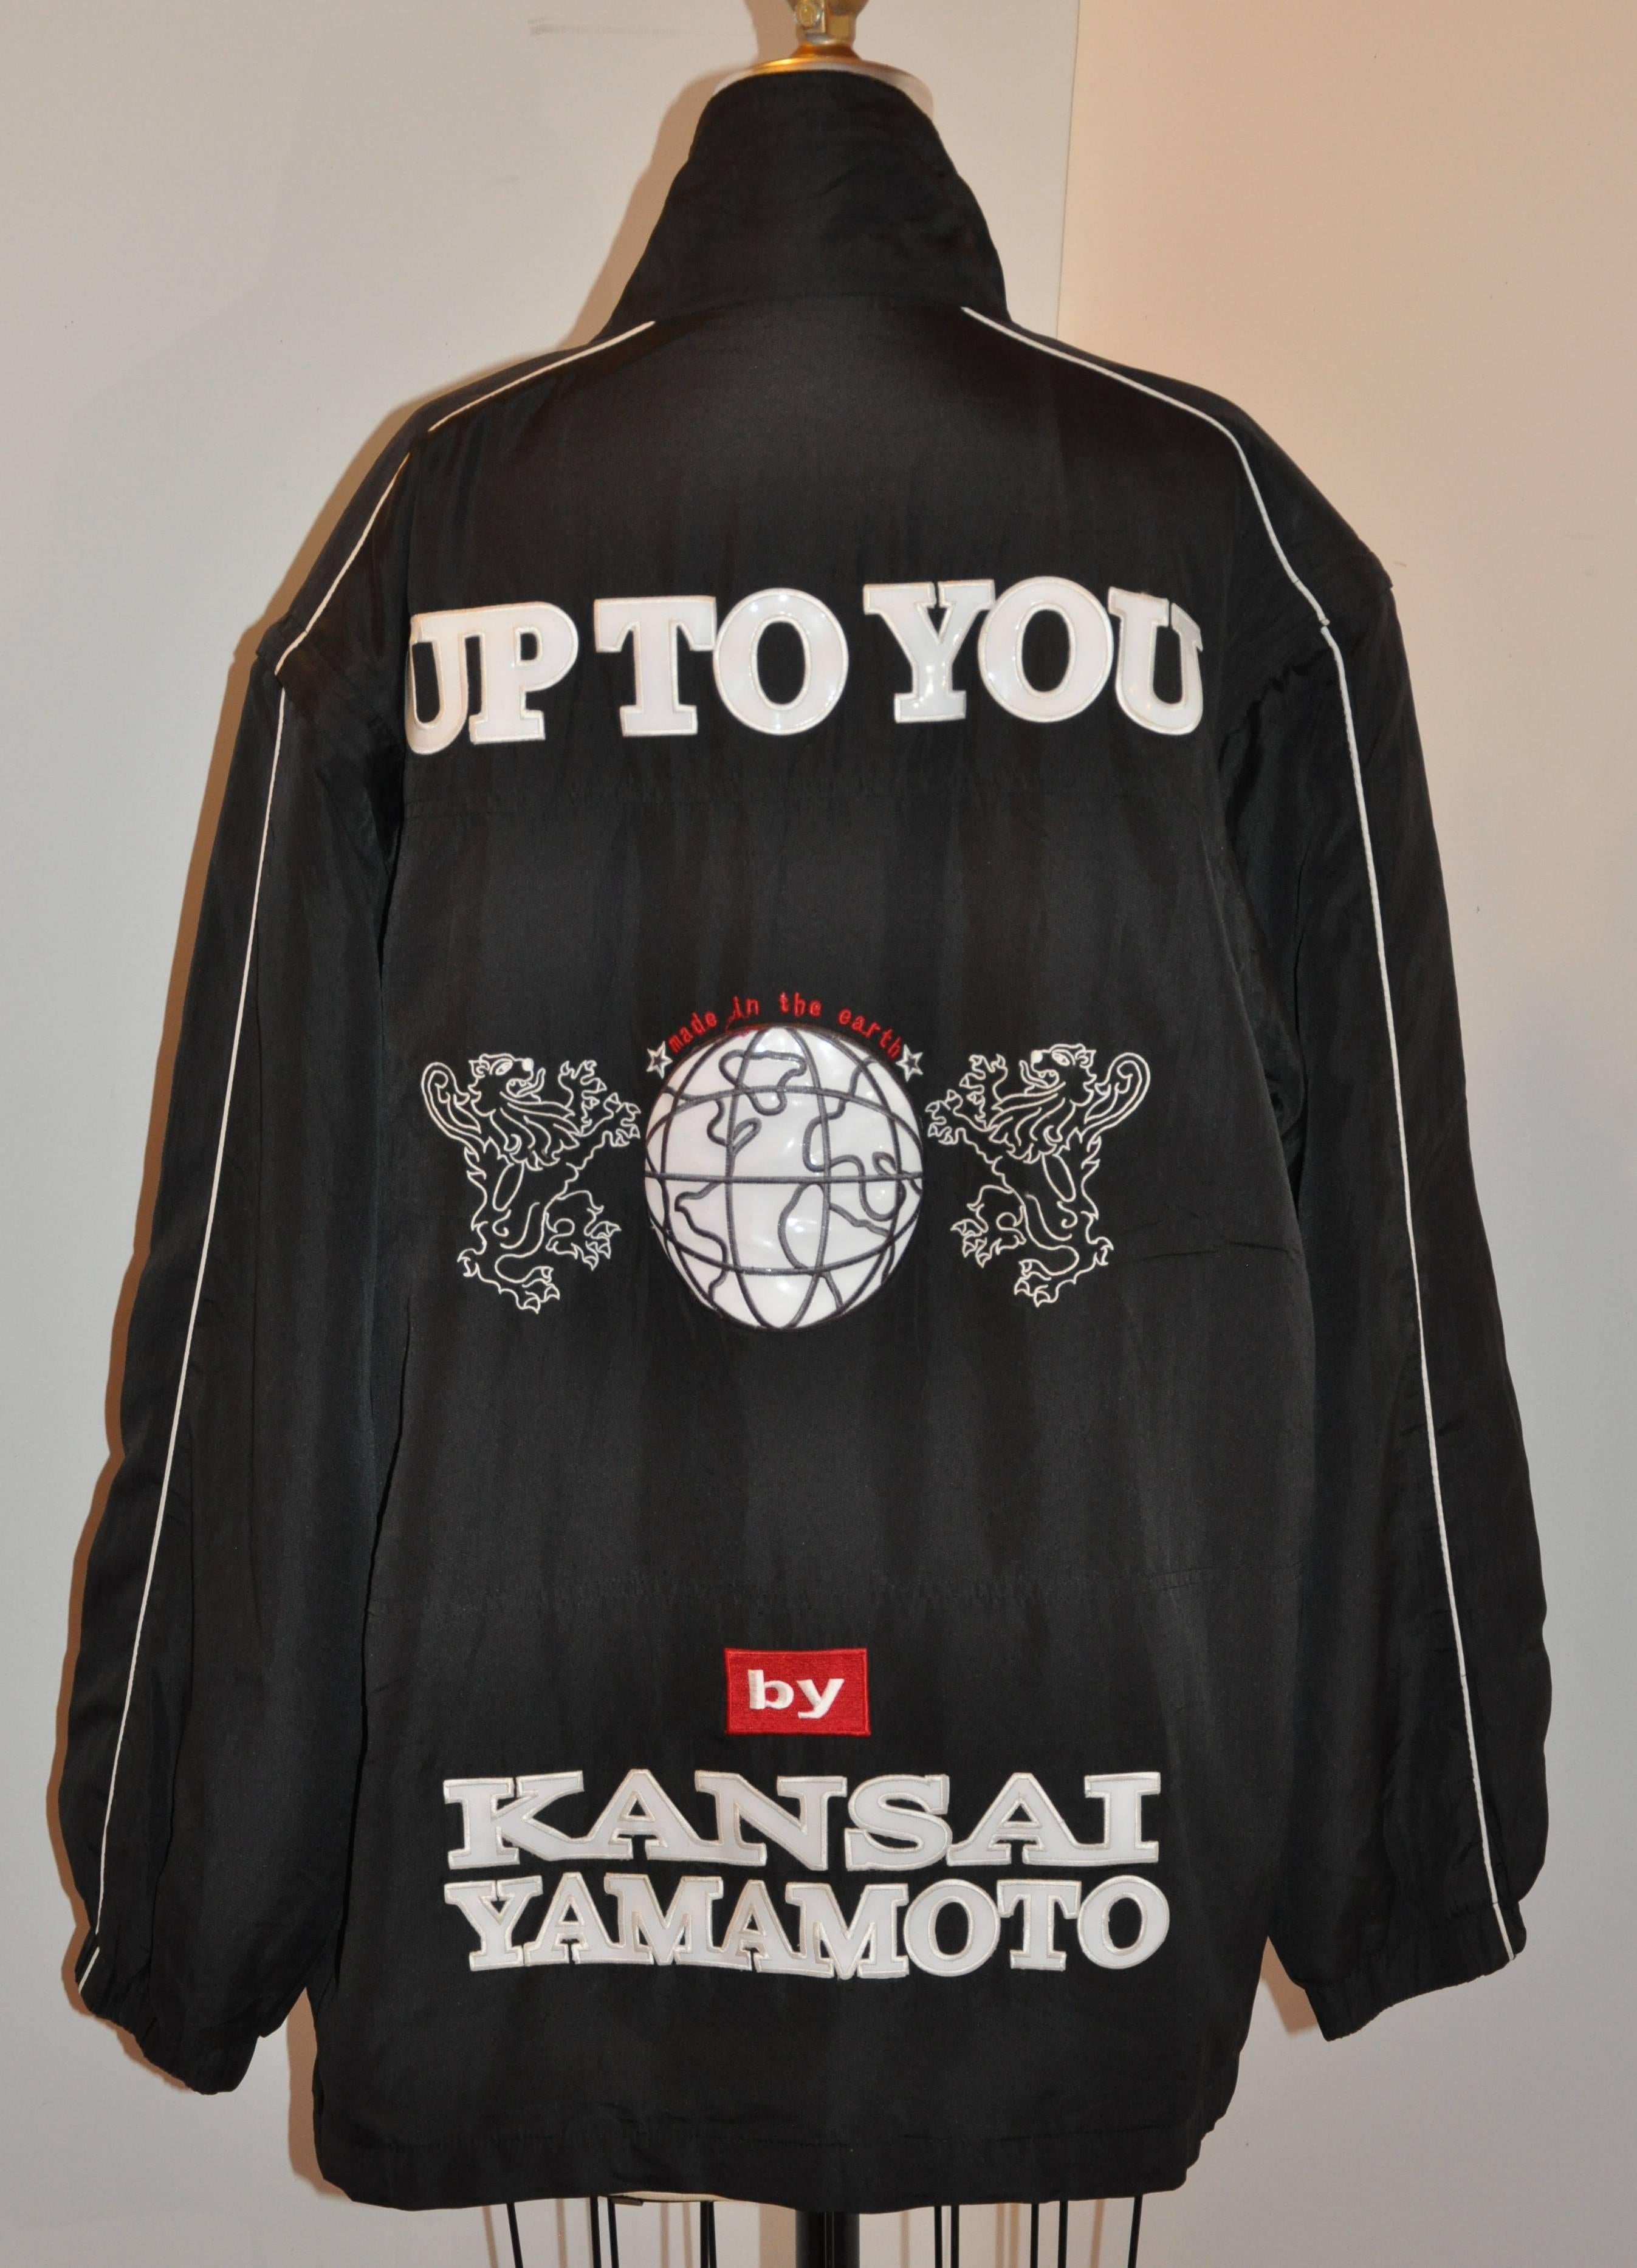 Kansai Yamamoto Men's black nylon zippered "Up To You" embroidered jacket is detailed with patches of "Up To You" in bold patches on the backside. The front bottom near the hem is accented with a rubber embossed patch "Up To